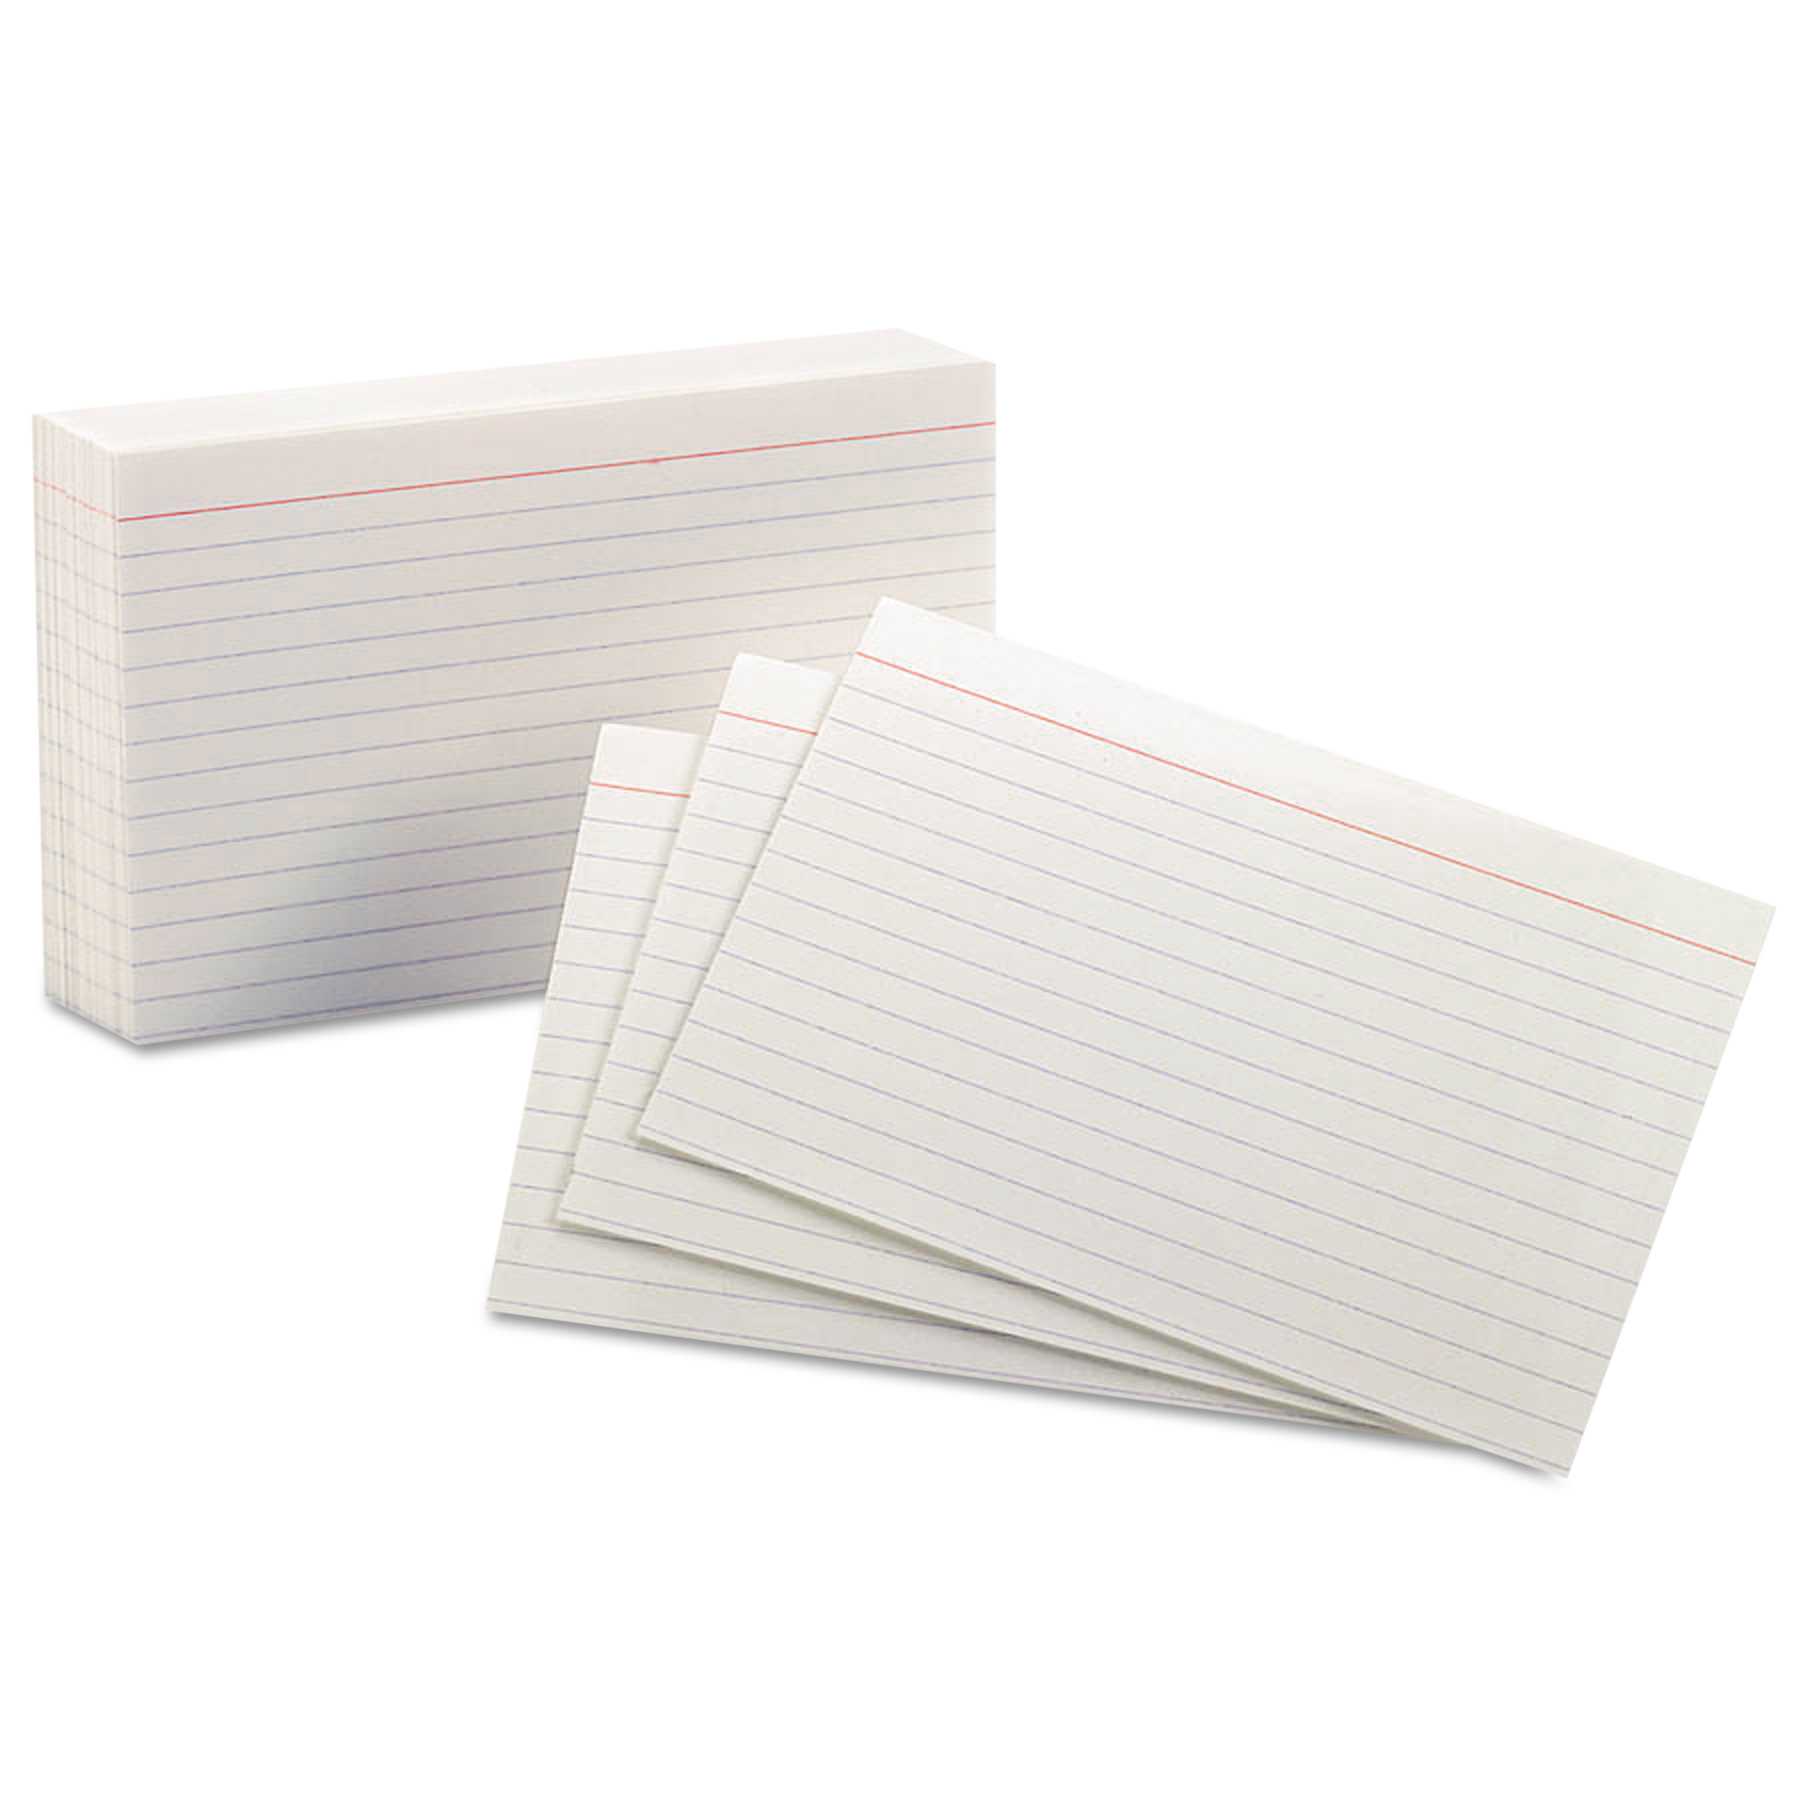 4X6 Note Cards – Major.magdalene Project Inside 4X6 Note Card Template